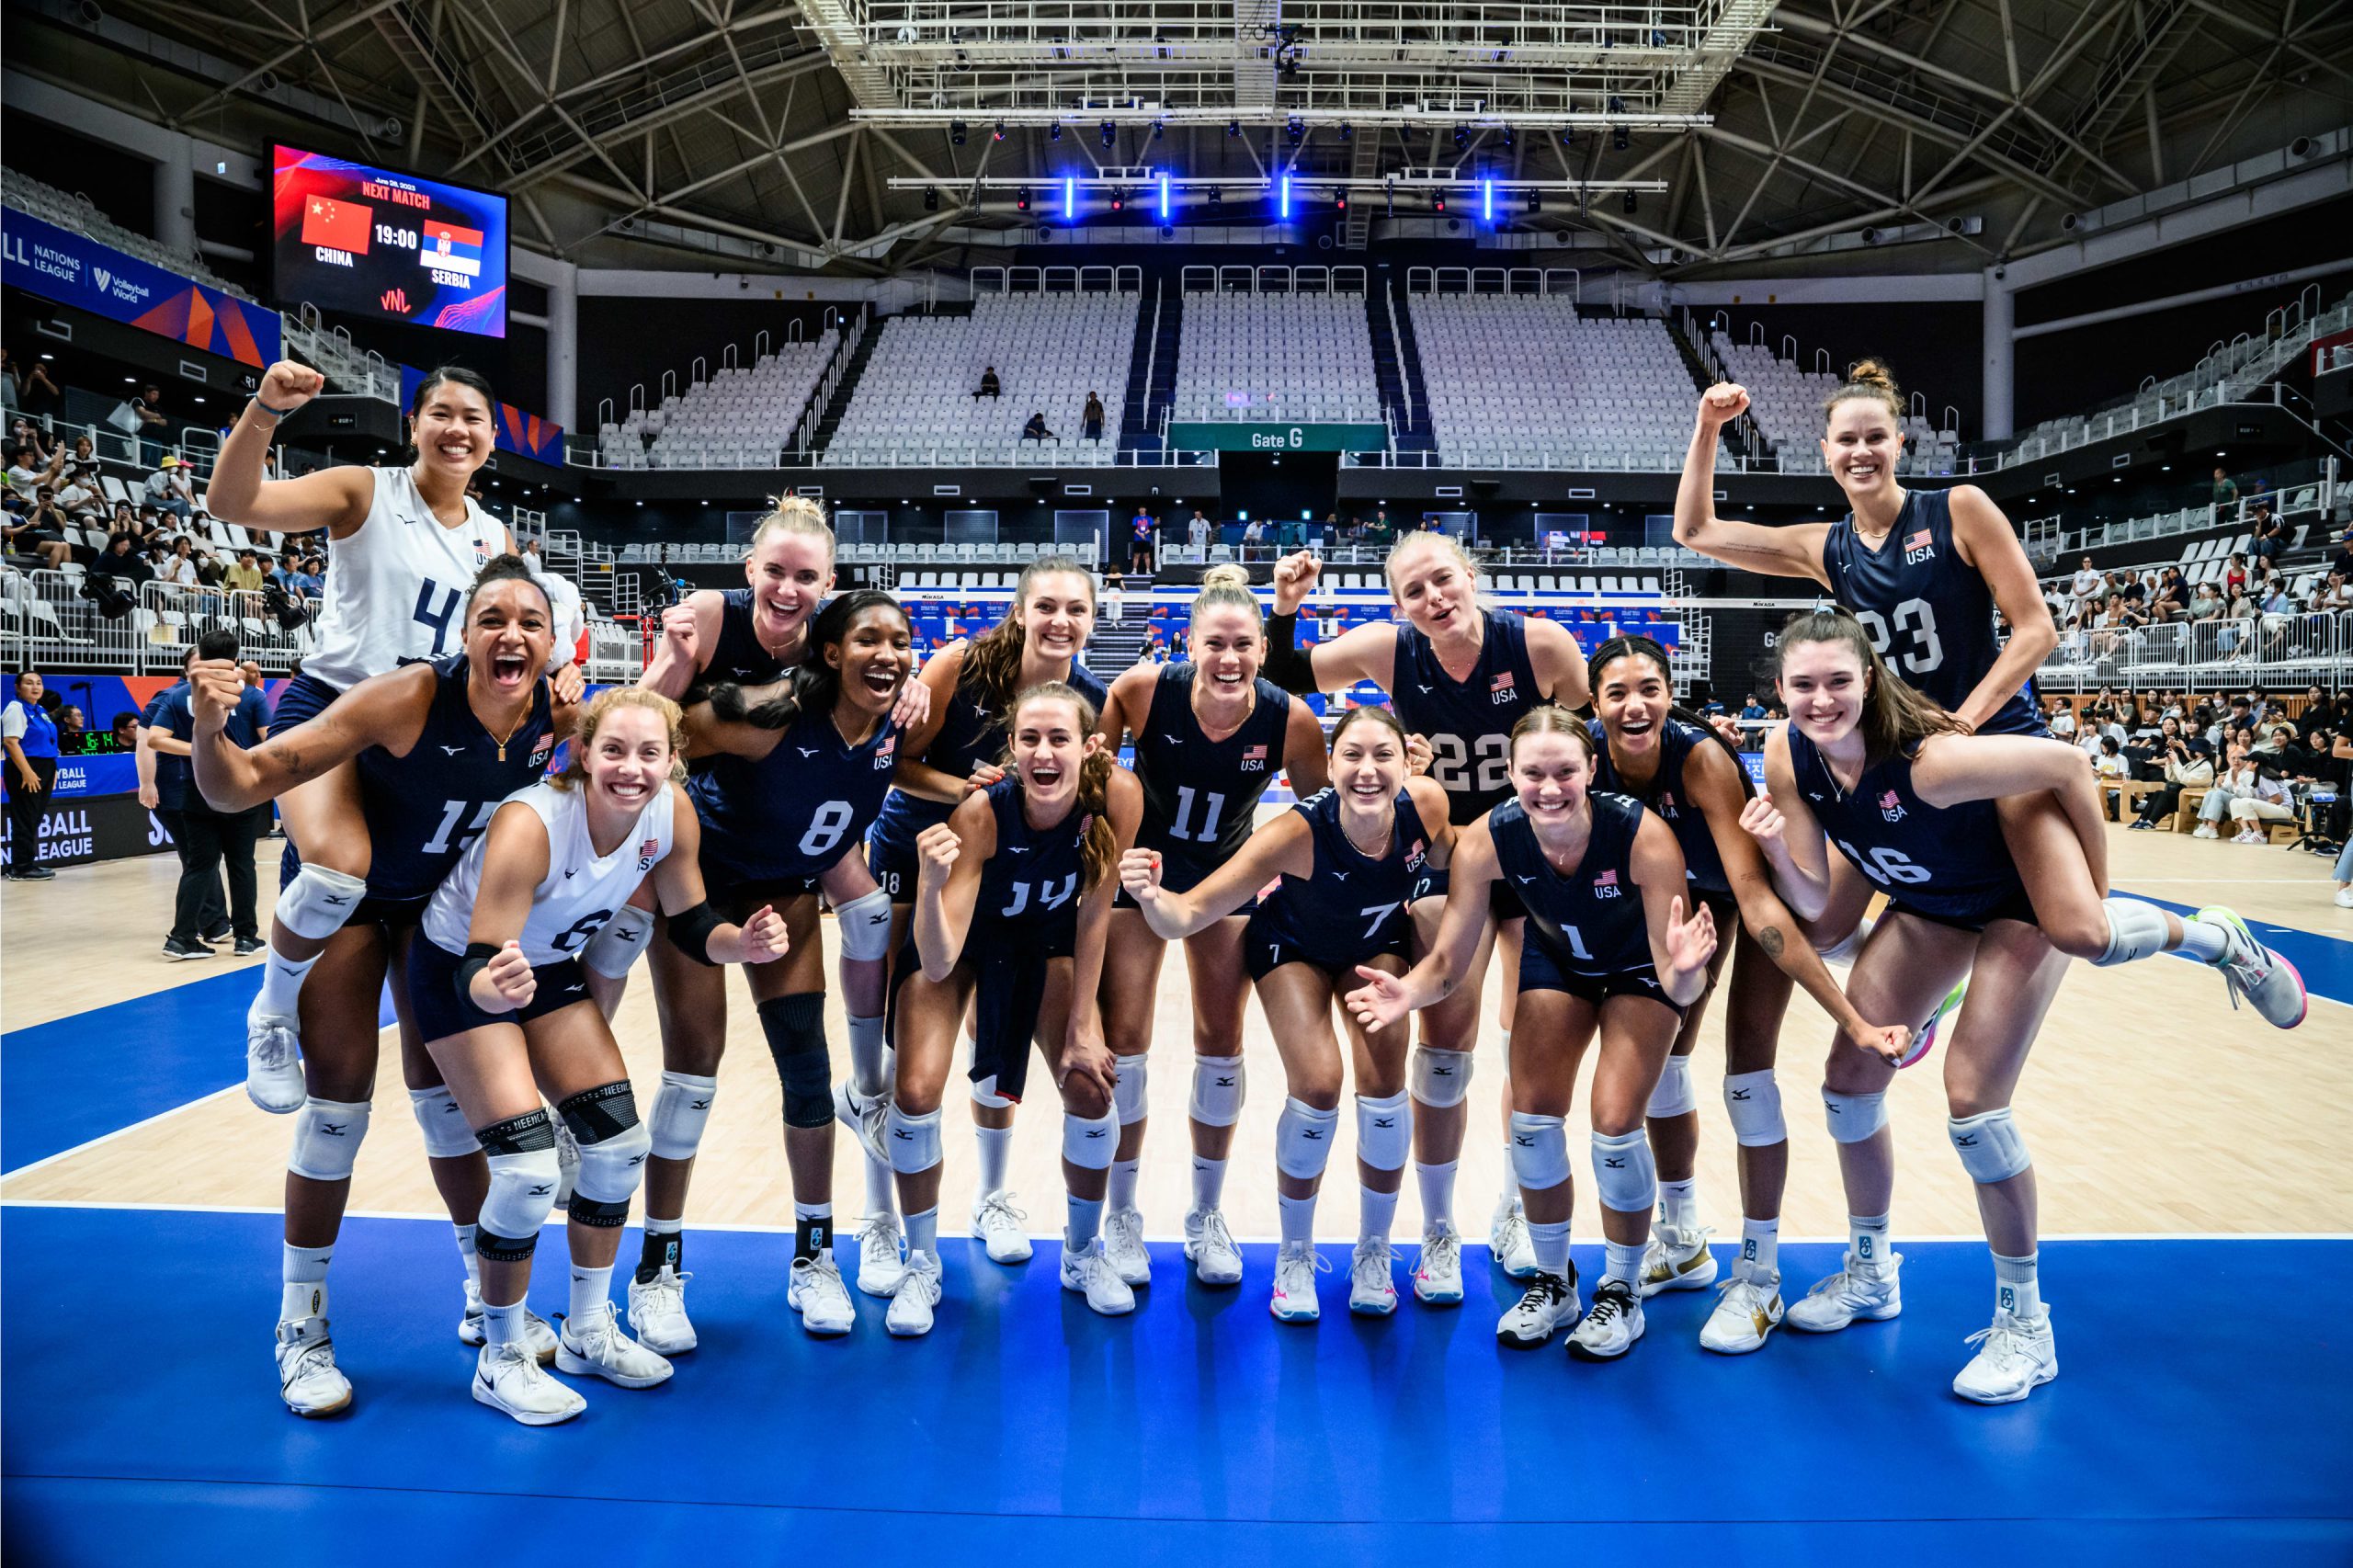 U.S. Women defeat Poland in thriller to move Into First Place in VNL